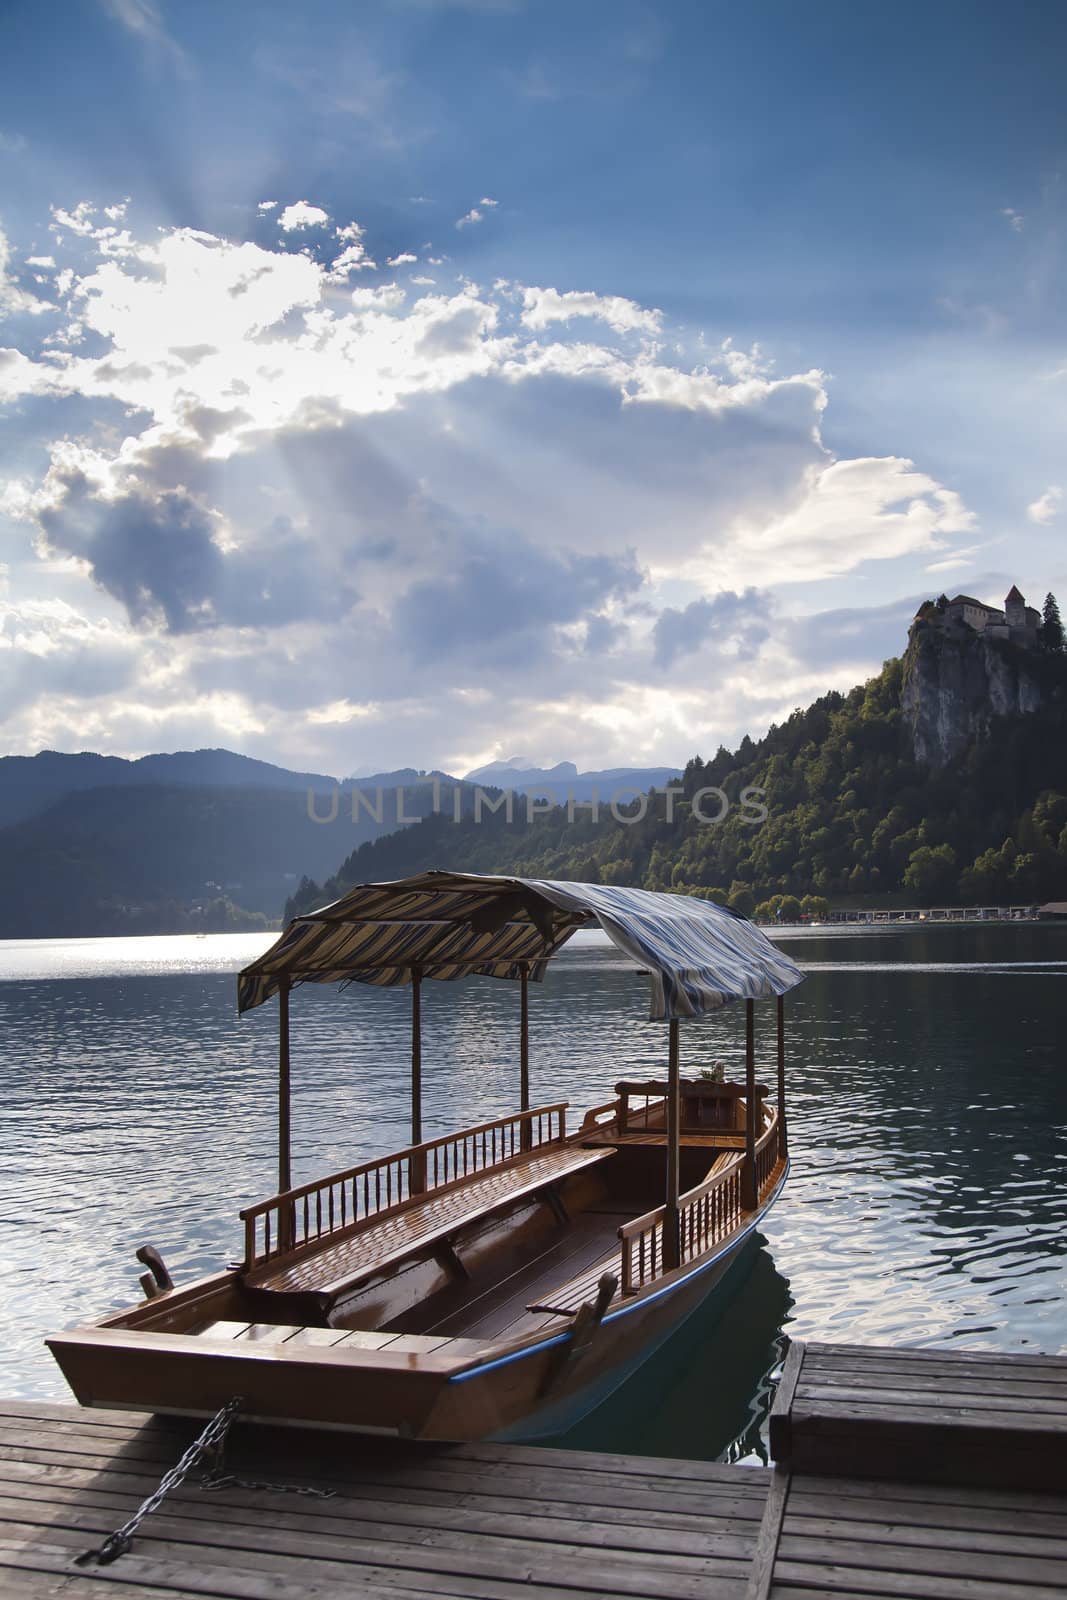 Boat on the Bled lake in Slovenia - one of the most beautiful regions of Julian Alps